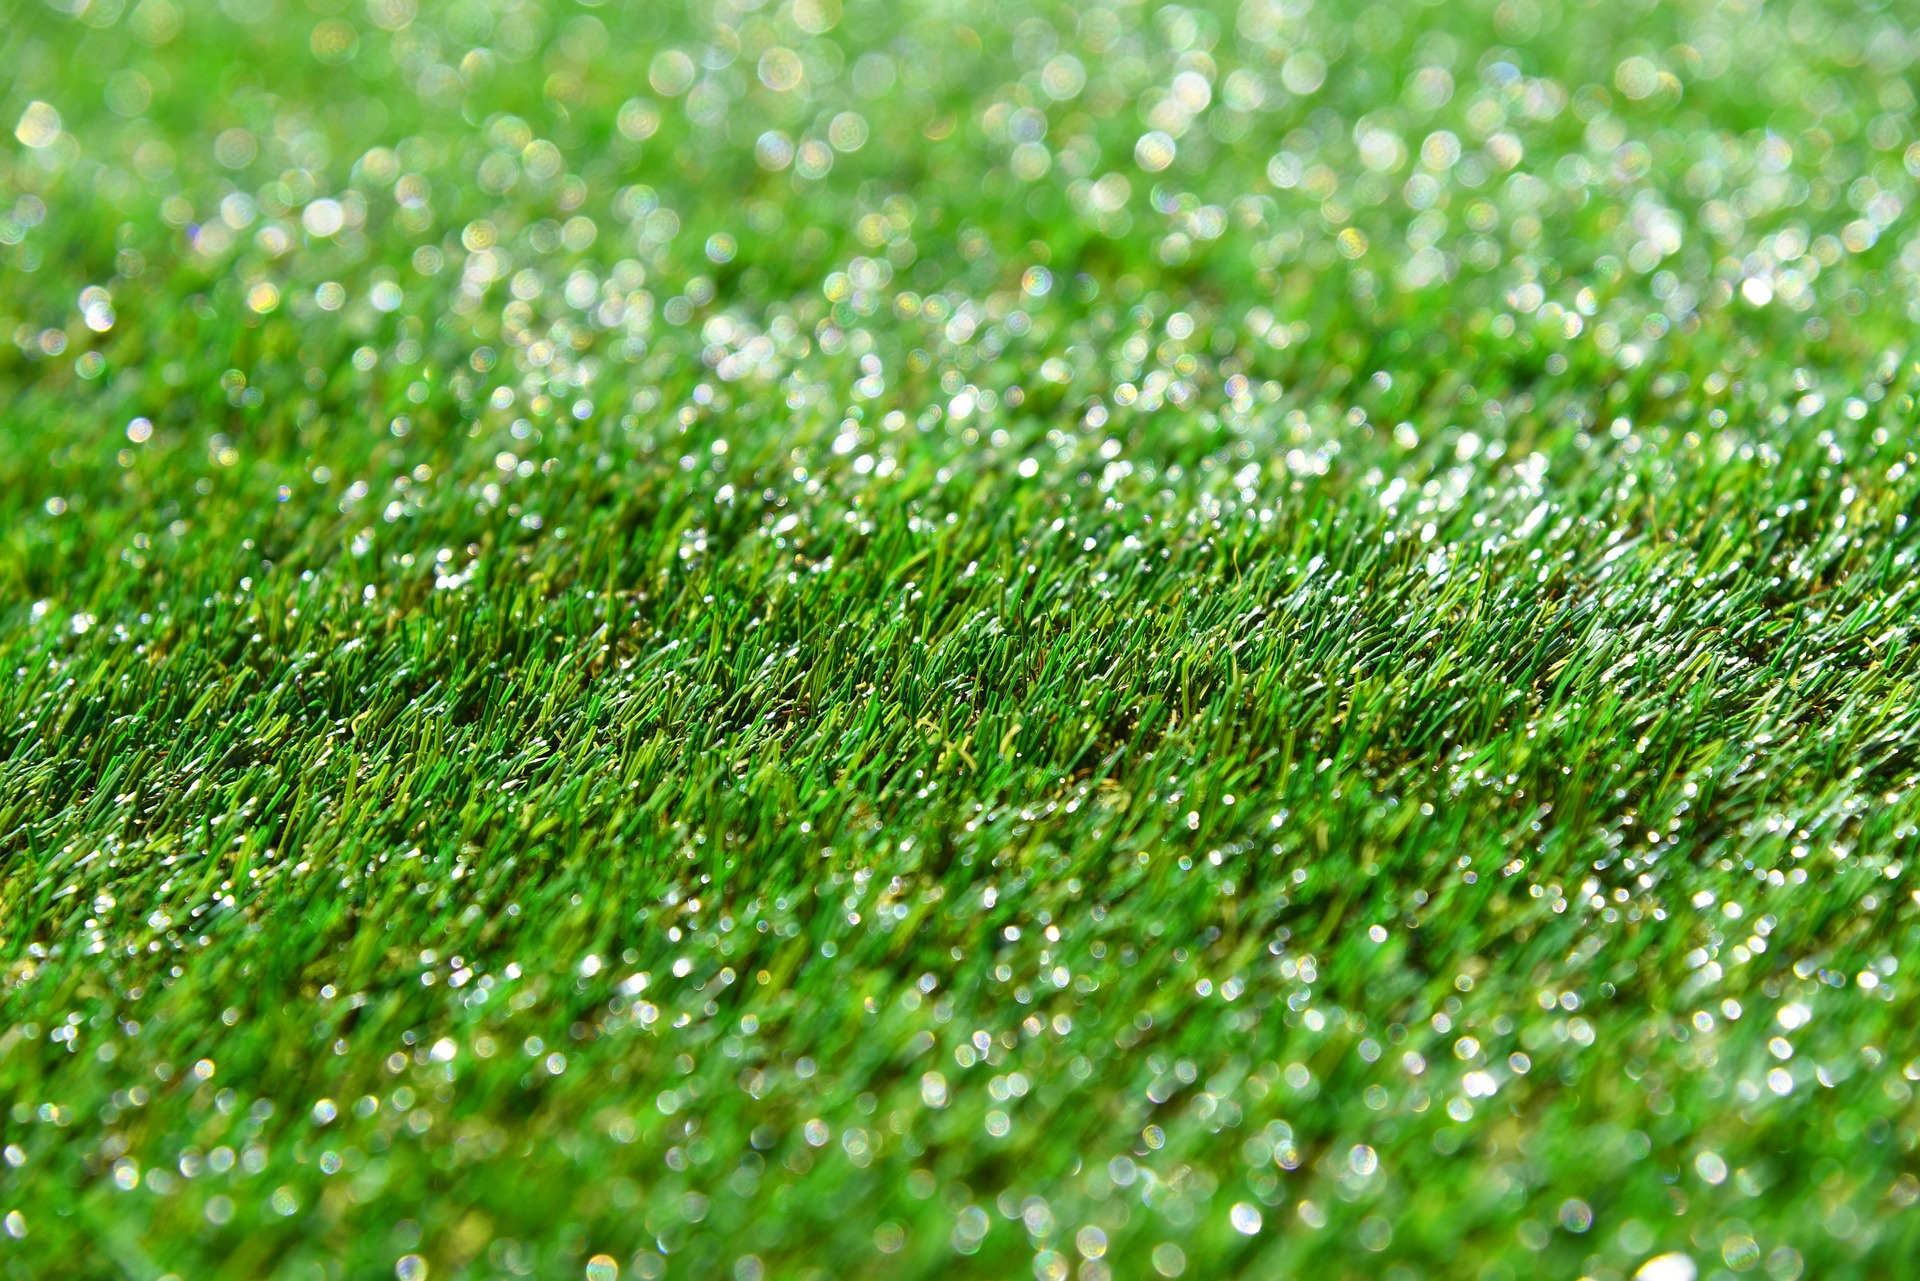 What Makes Artificial Turf A Great Choice For Nursery Gardens?